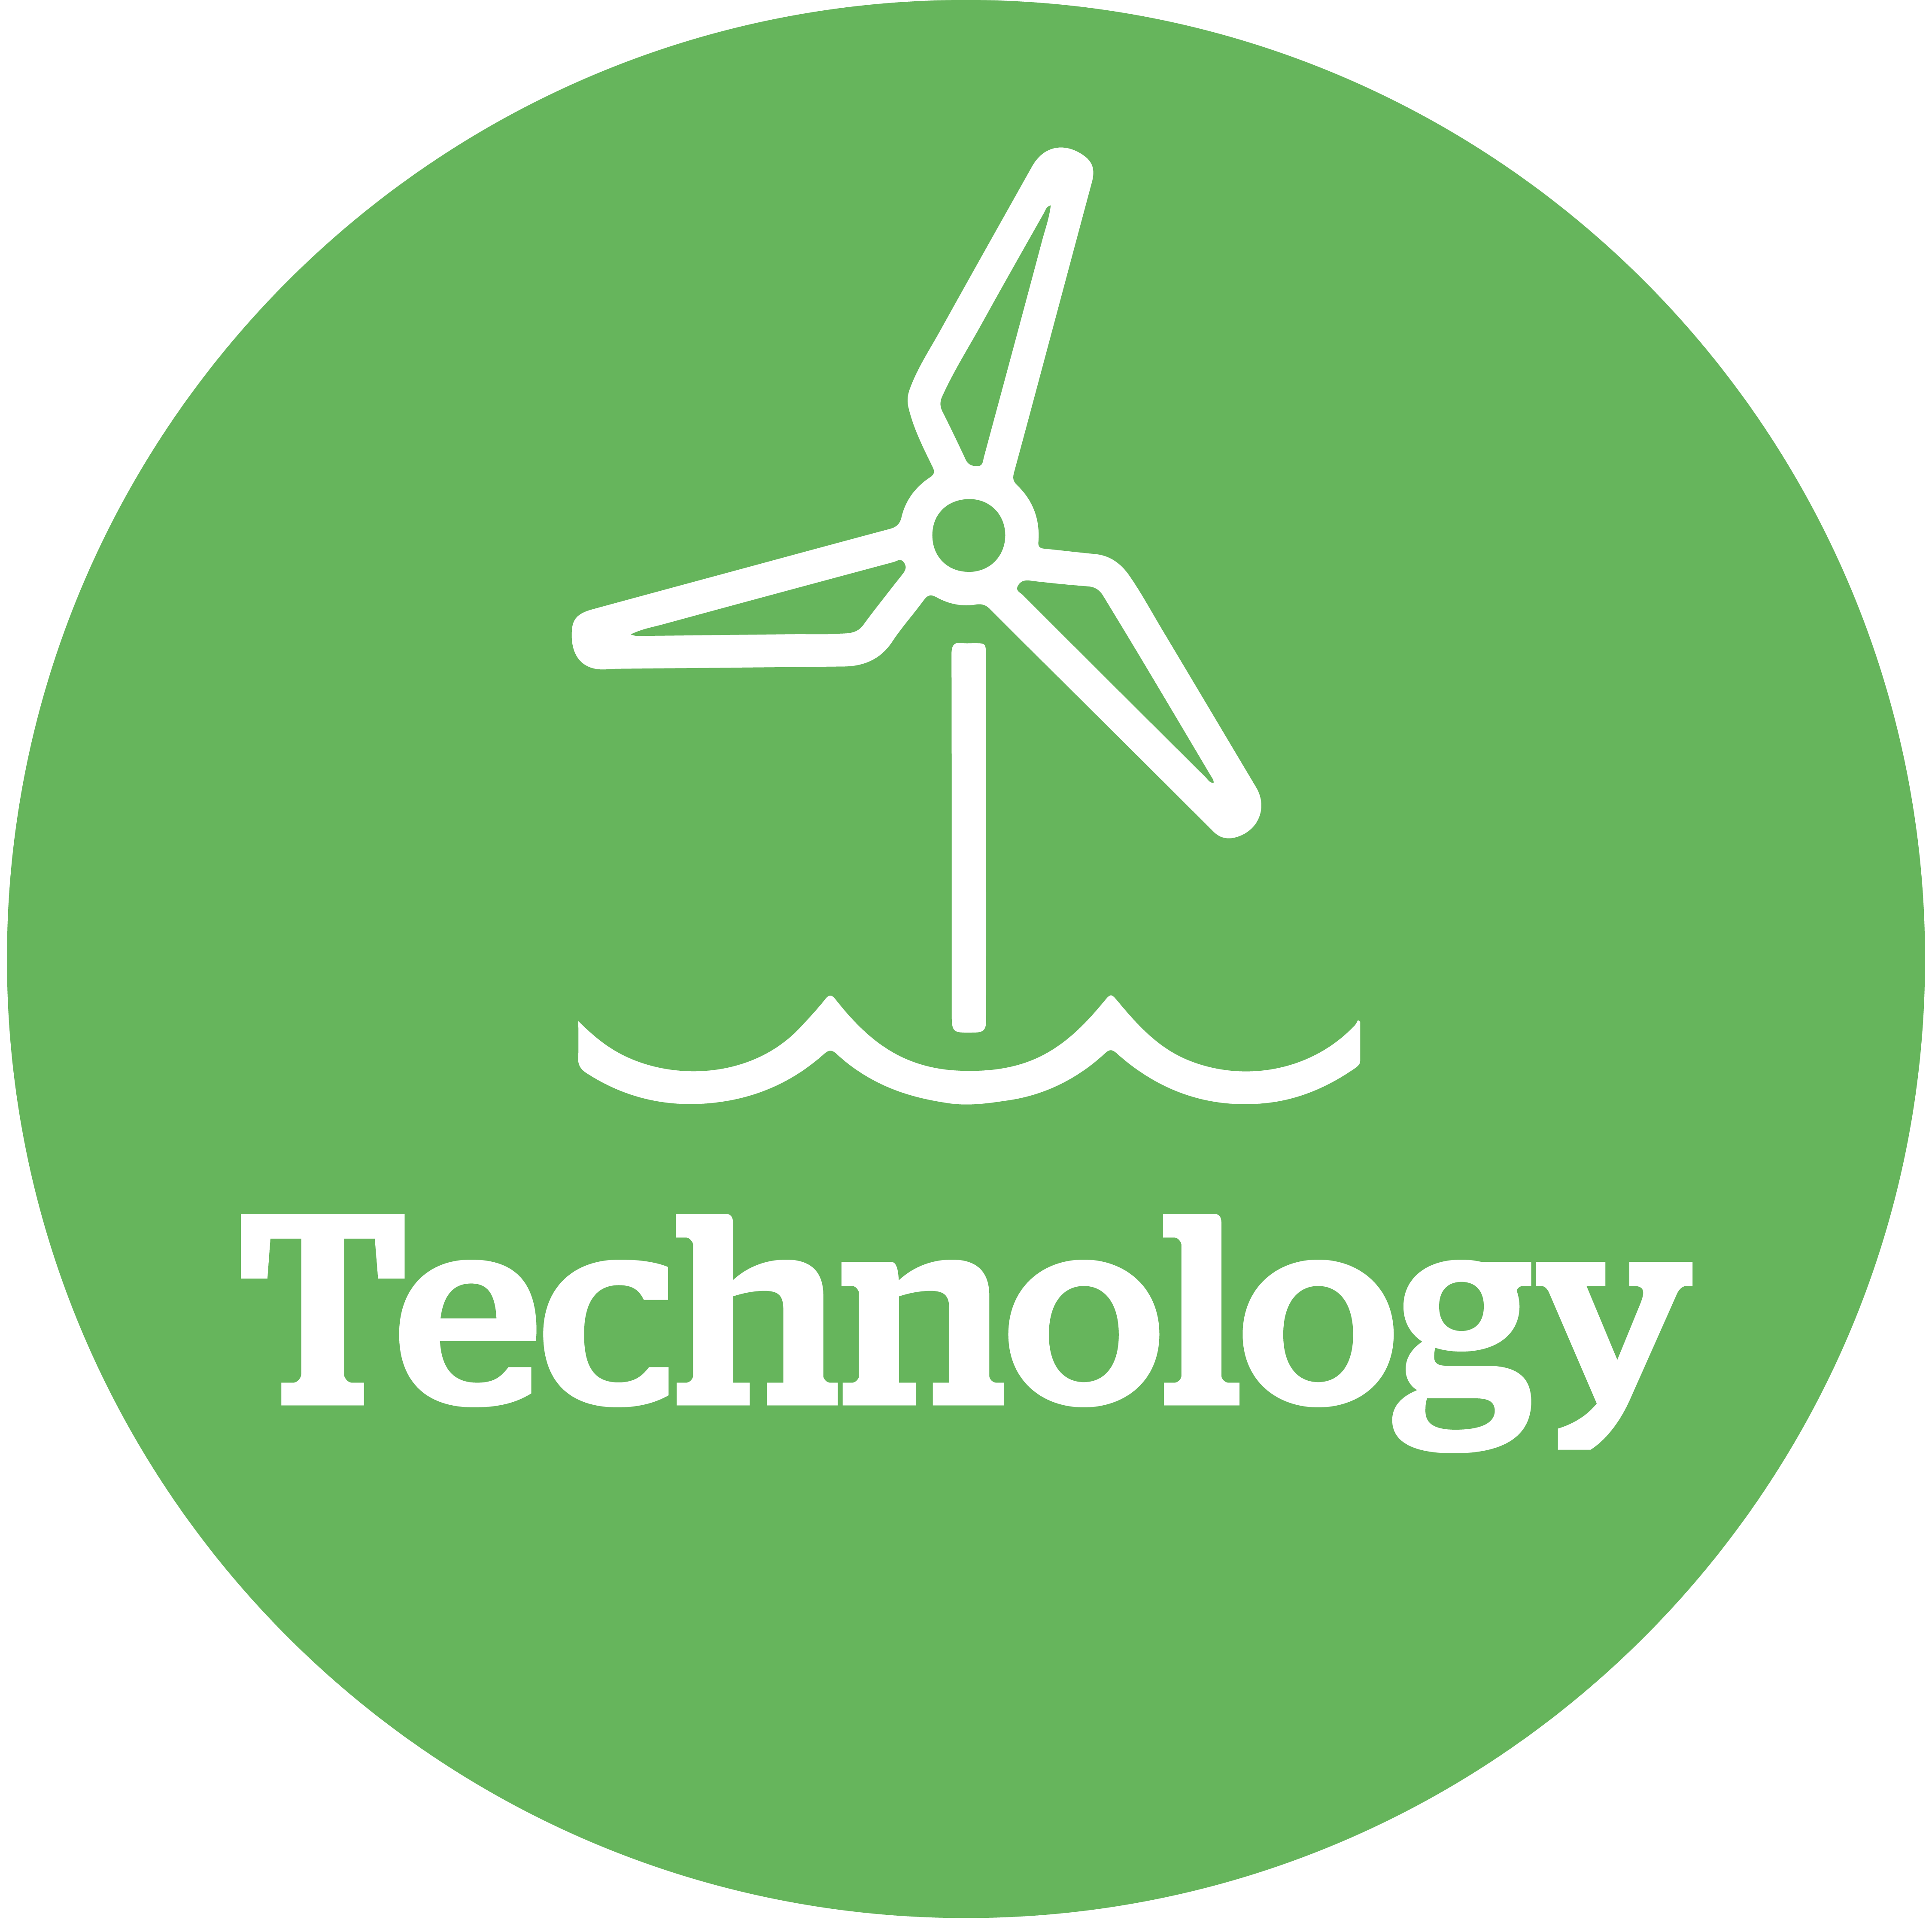 Icon saying 'technology' with line drawing of a turbine